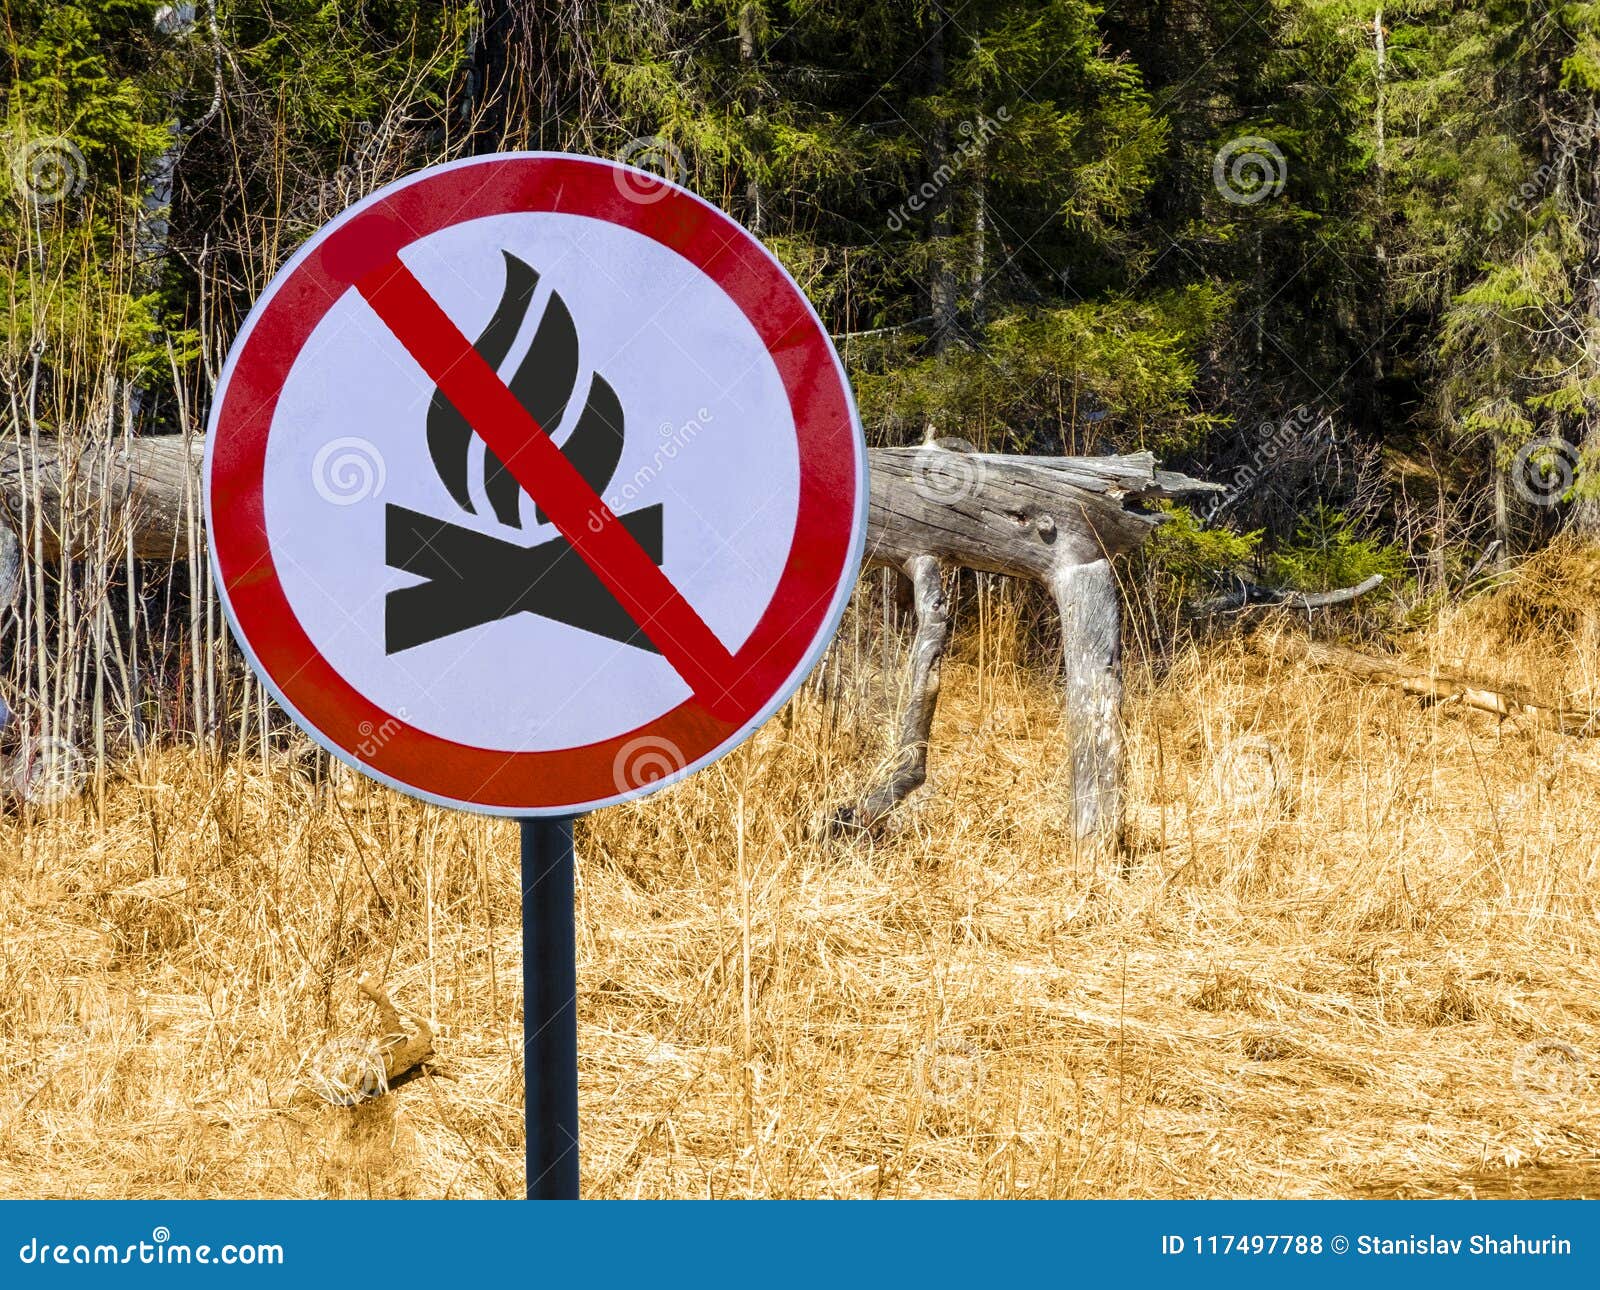 sign ban bonfires on the background of forest and dry grass and trees.